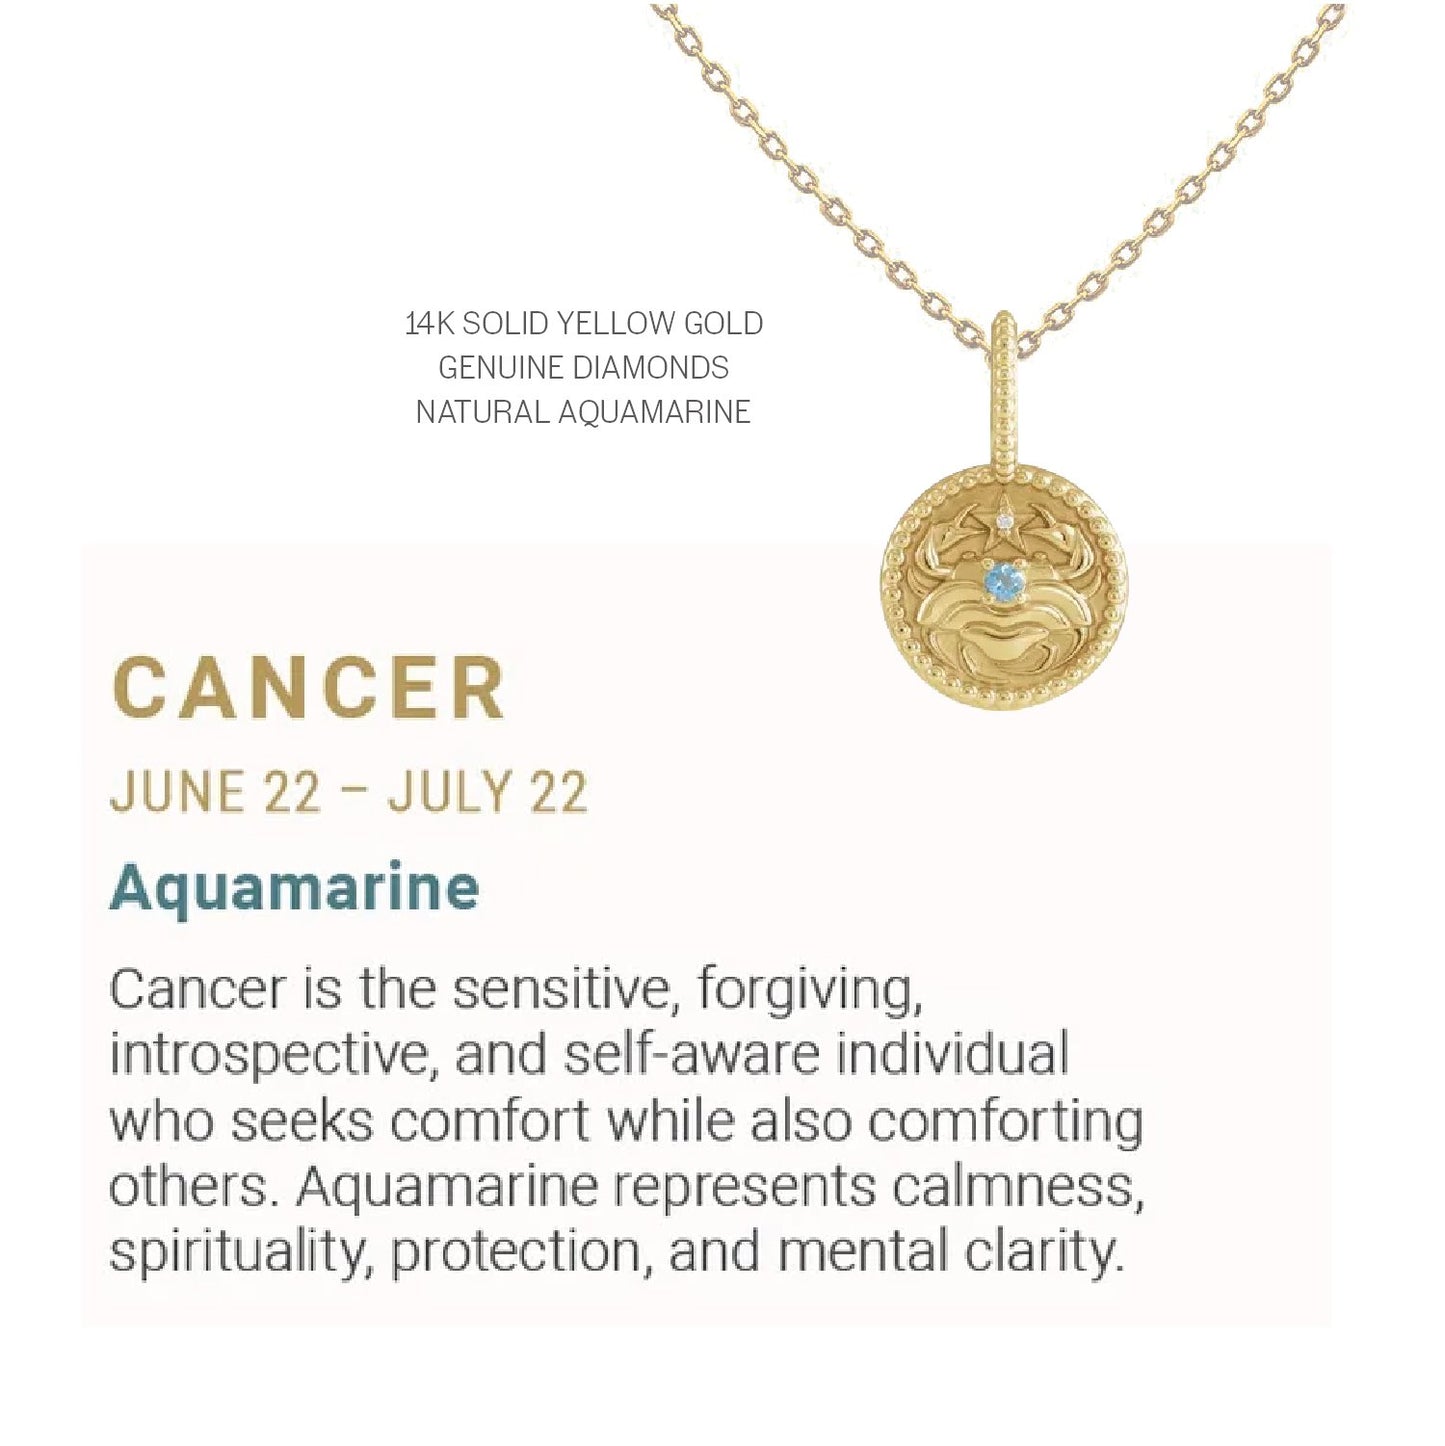 Zodiac Charm Necklace in 14K Gold with Diamonds Necklace Robyn Canady 14K Solid Gold 16" Cancer